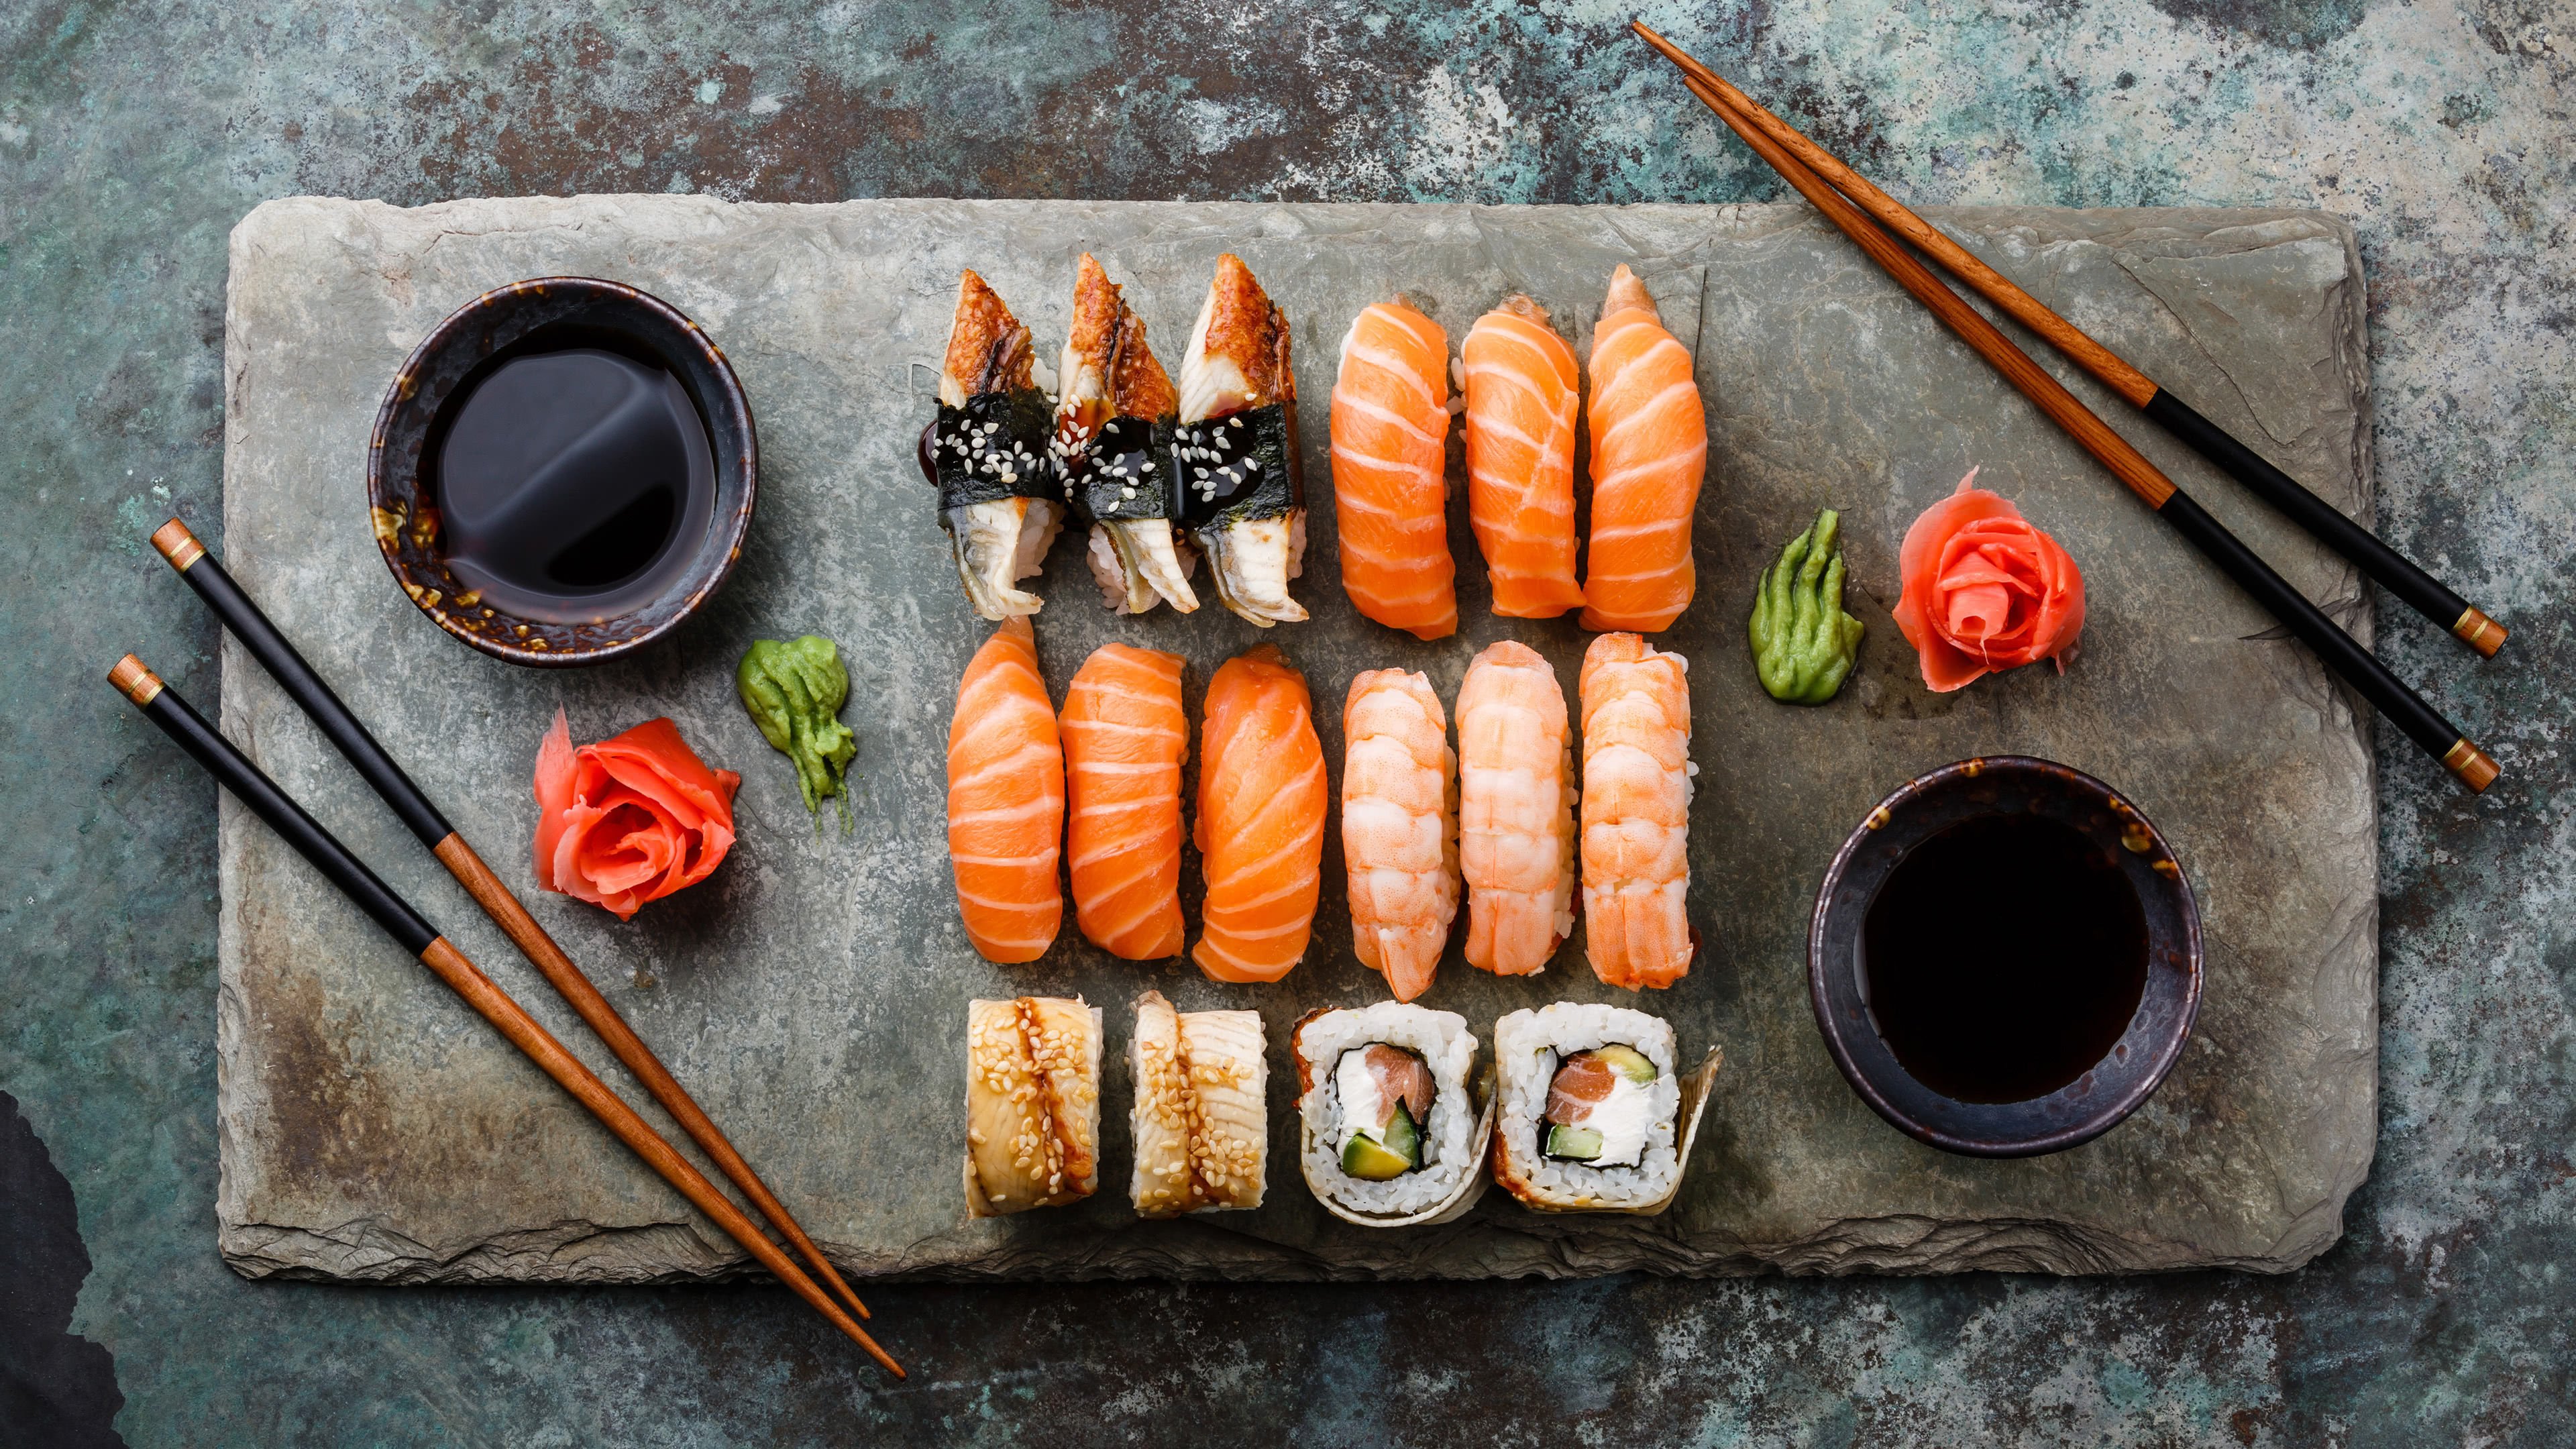 500 Sushi Pictures  Download Free Images on Unsplash